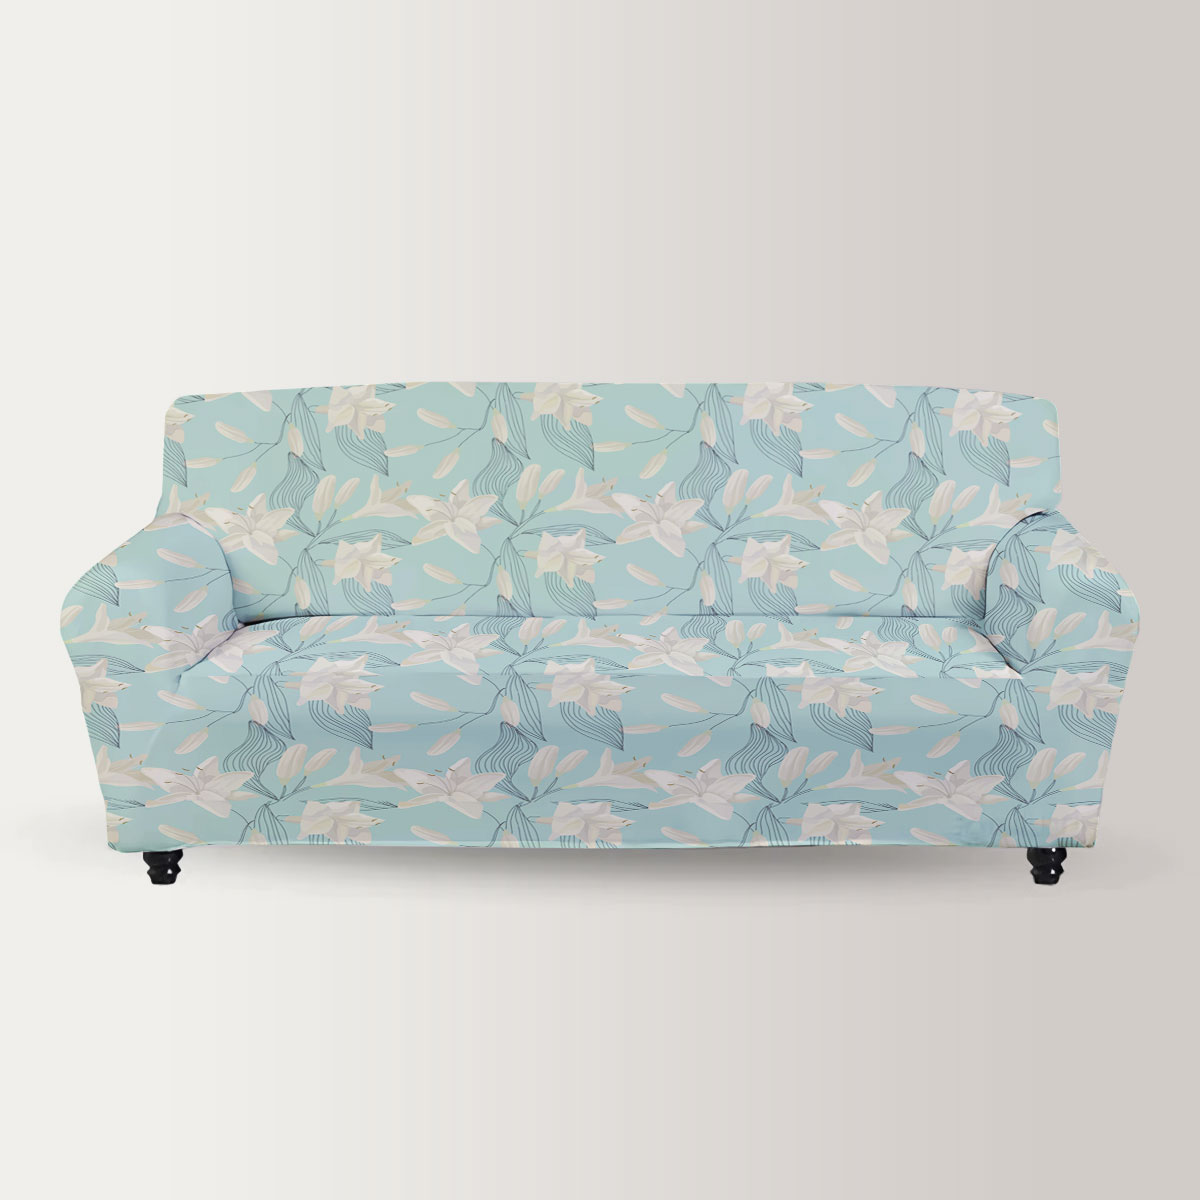 Tropical Lily FLowers Sofa Cover